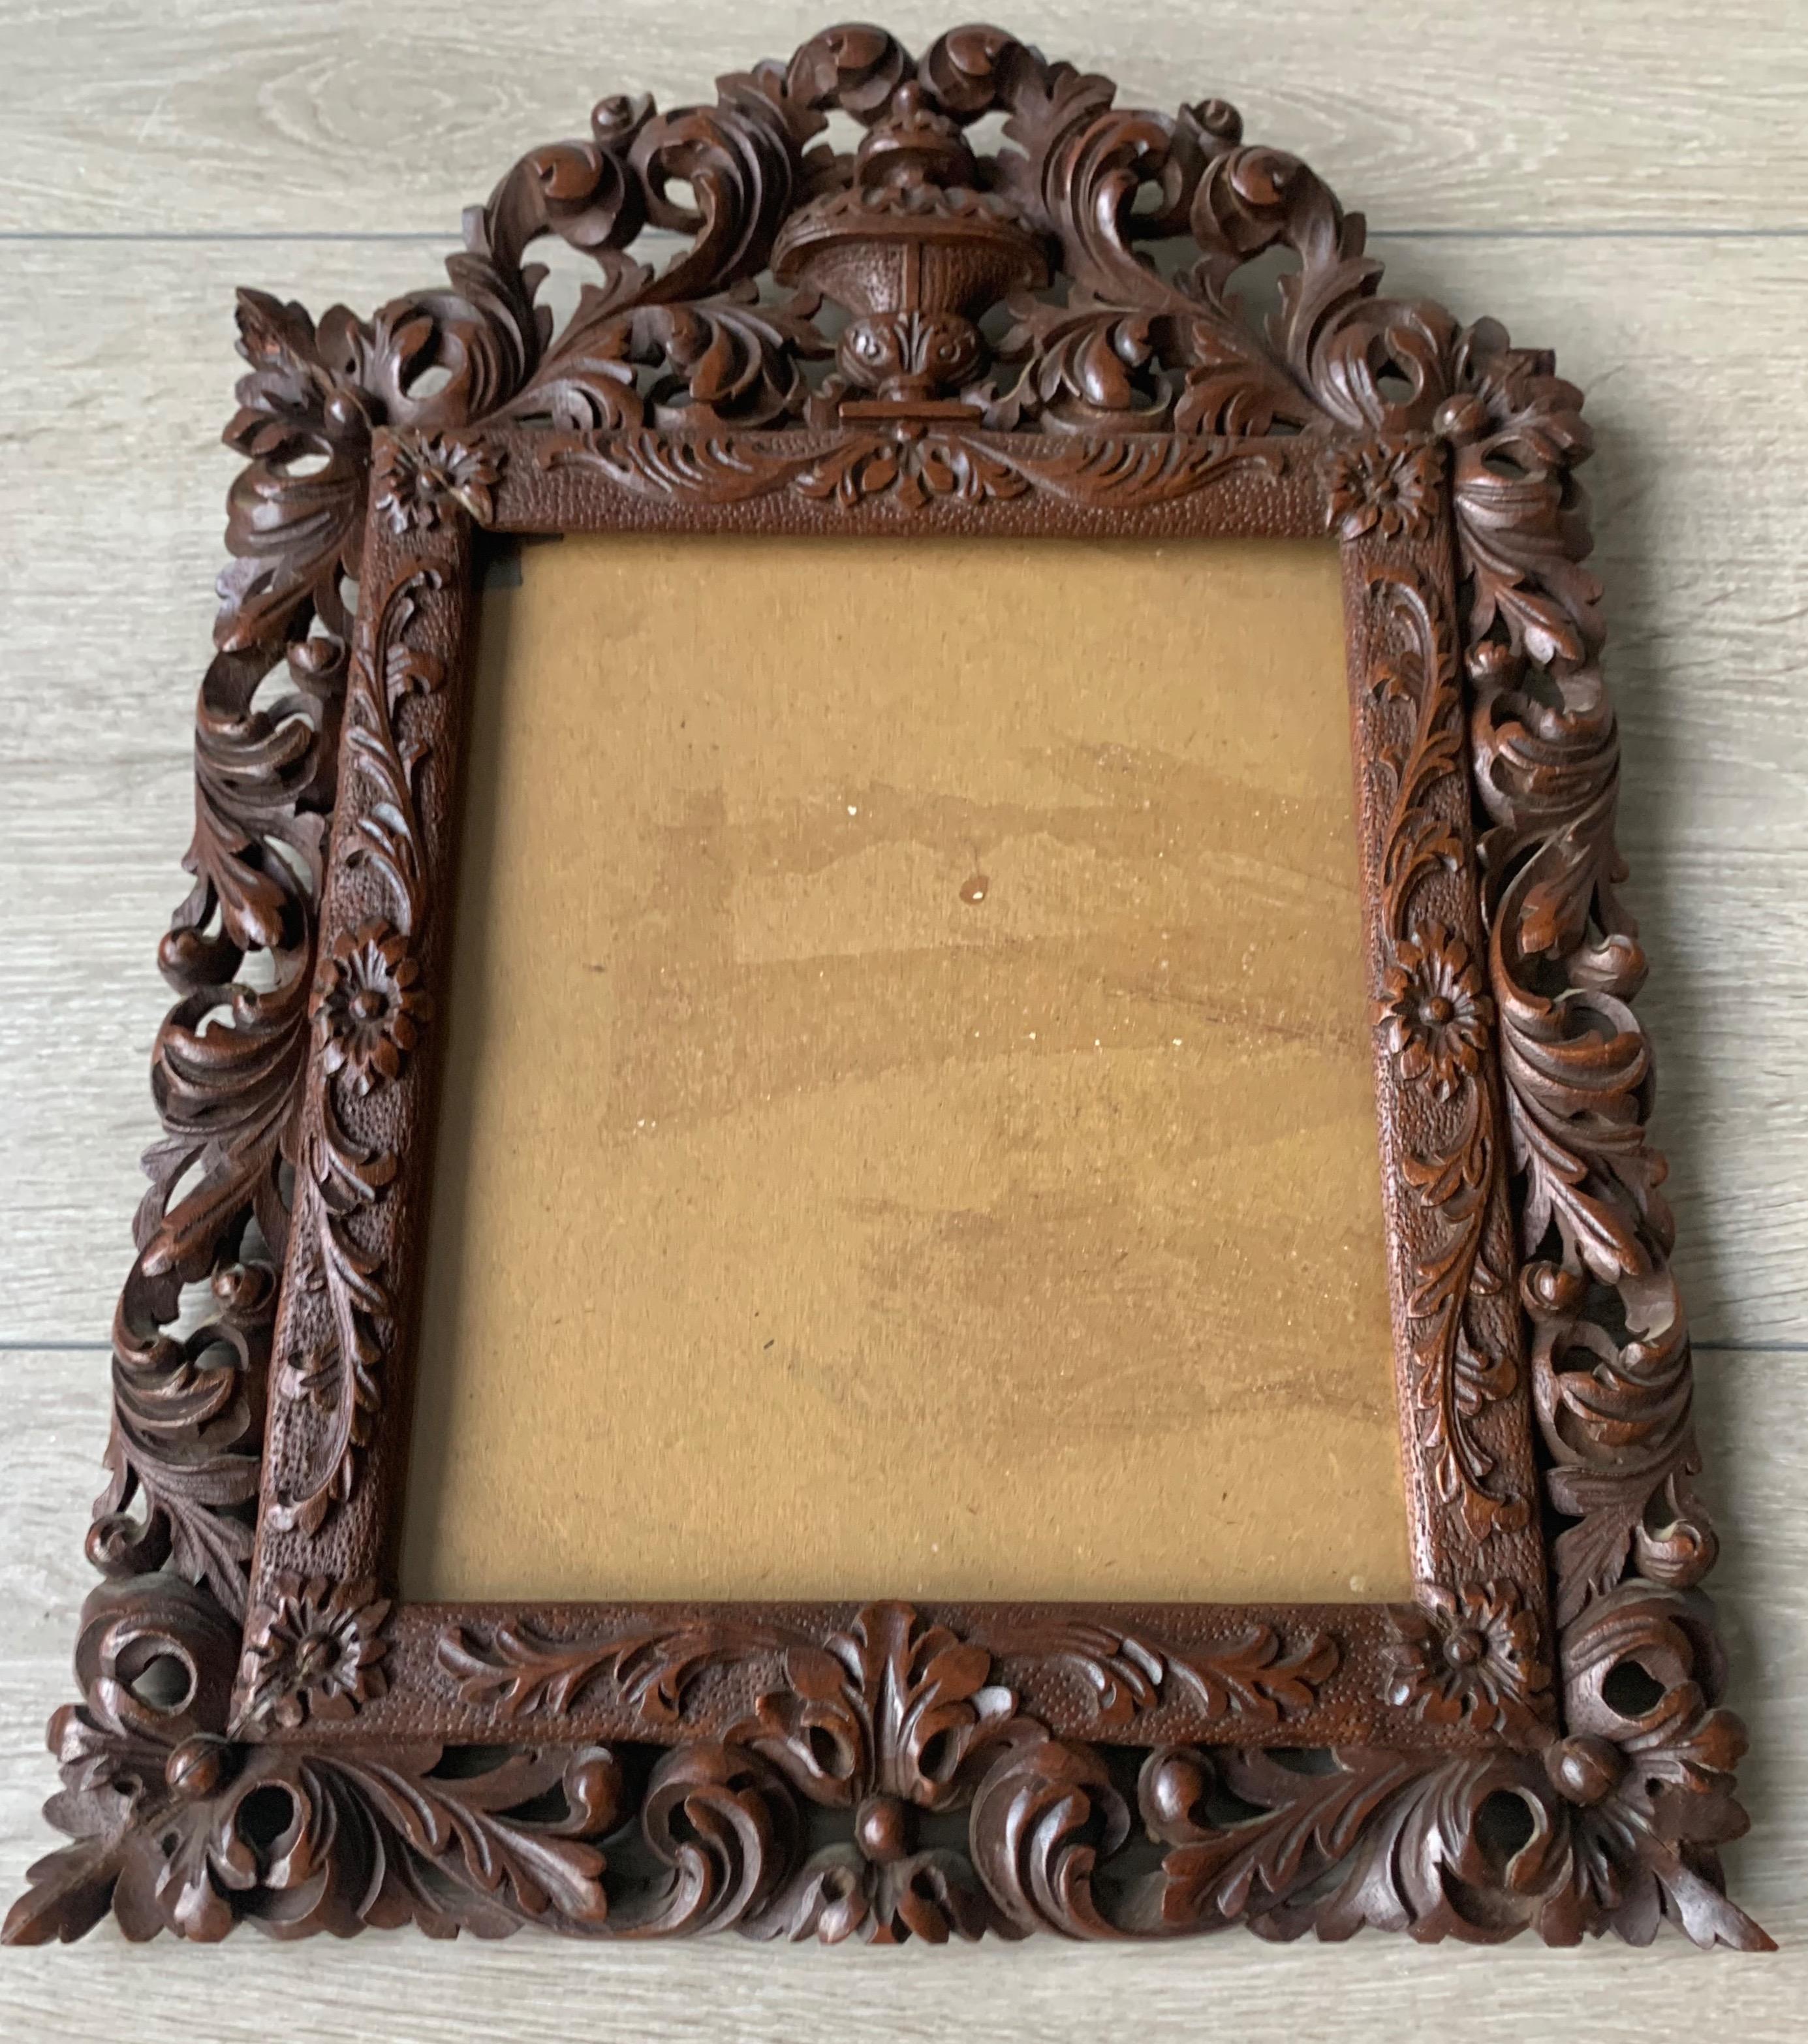 Stunning antique picture or photograph wall picture frame from the mid 1800's.

This stylish and all handcrafted picture frame will make great decoration on your wall and with a work of art or a photo of a loved one inside, it will become even more